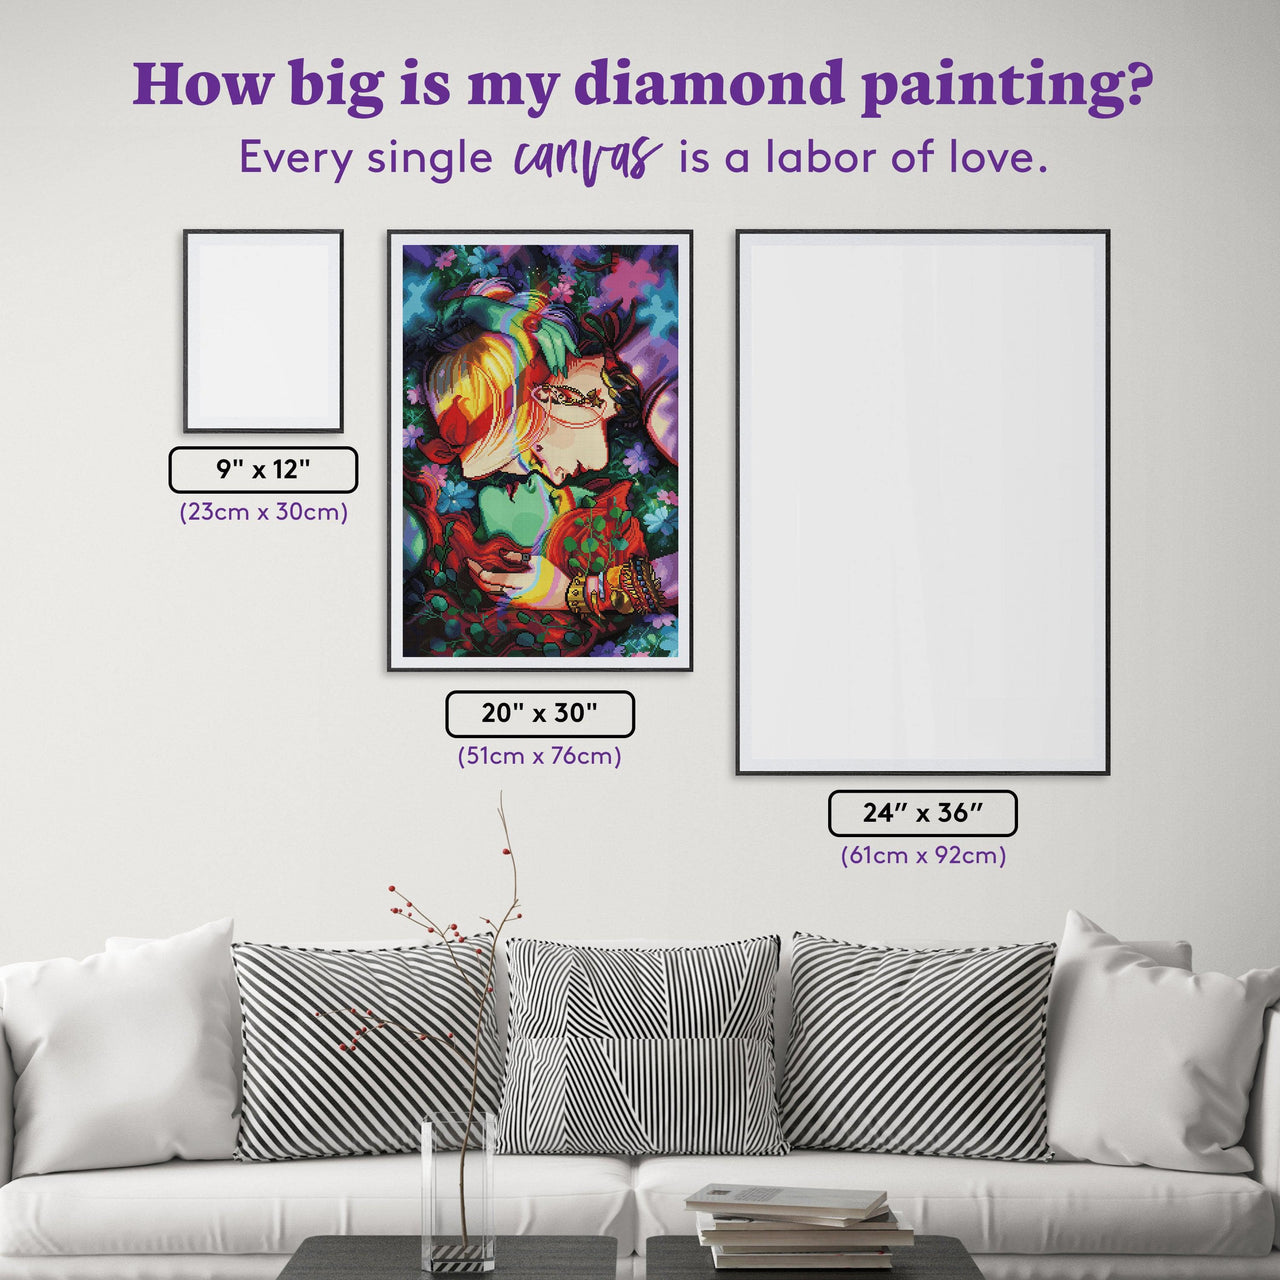 Diamond Painting Partners In Crime 20" x 30" (51cm x 76cm) / Square With 67 Colors Including 4 ABs / 62,220